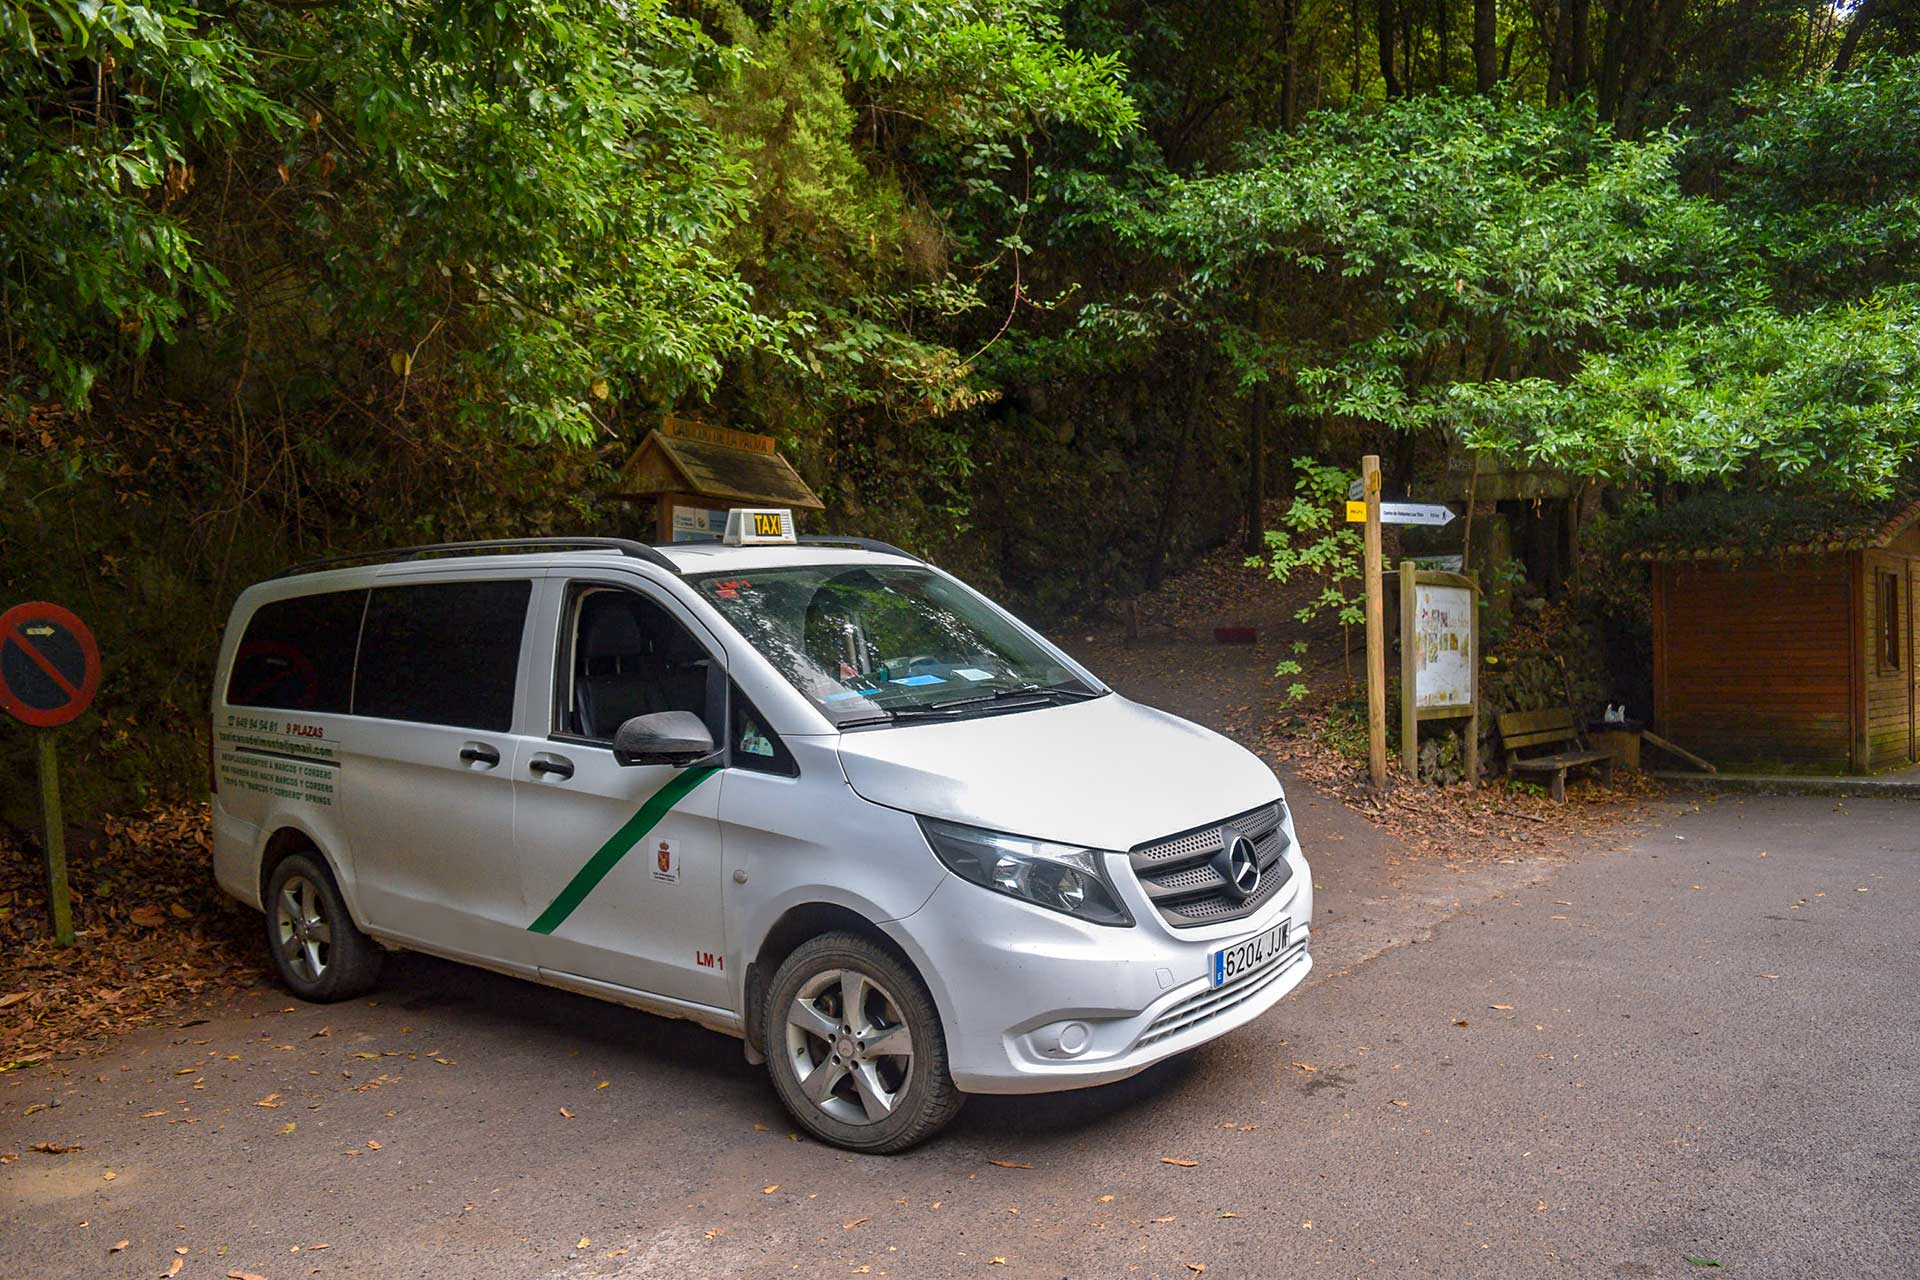 4x4 Taxi Service in the North of La Palma - Taxi to the Marcos y Cordero trail